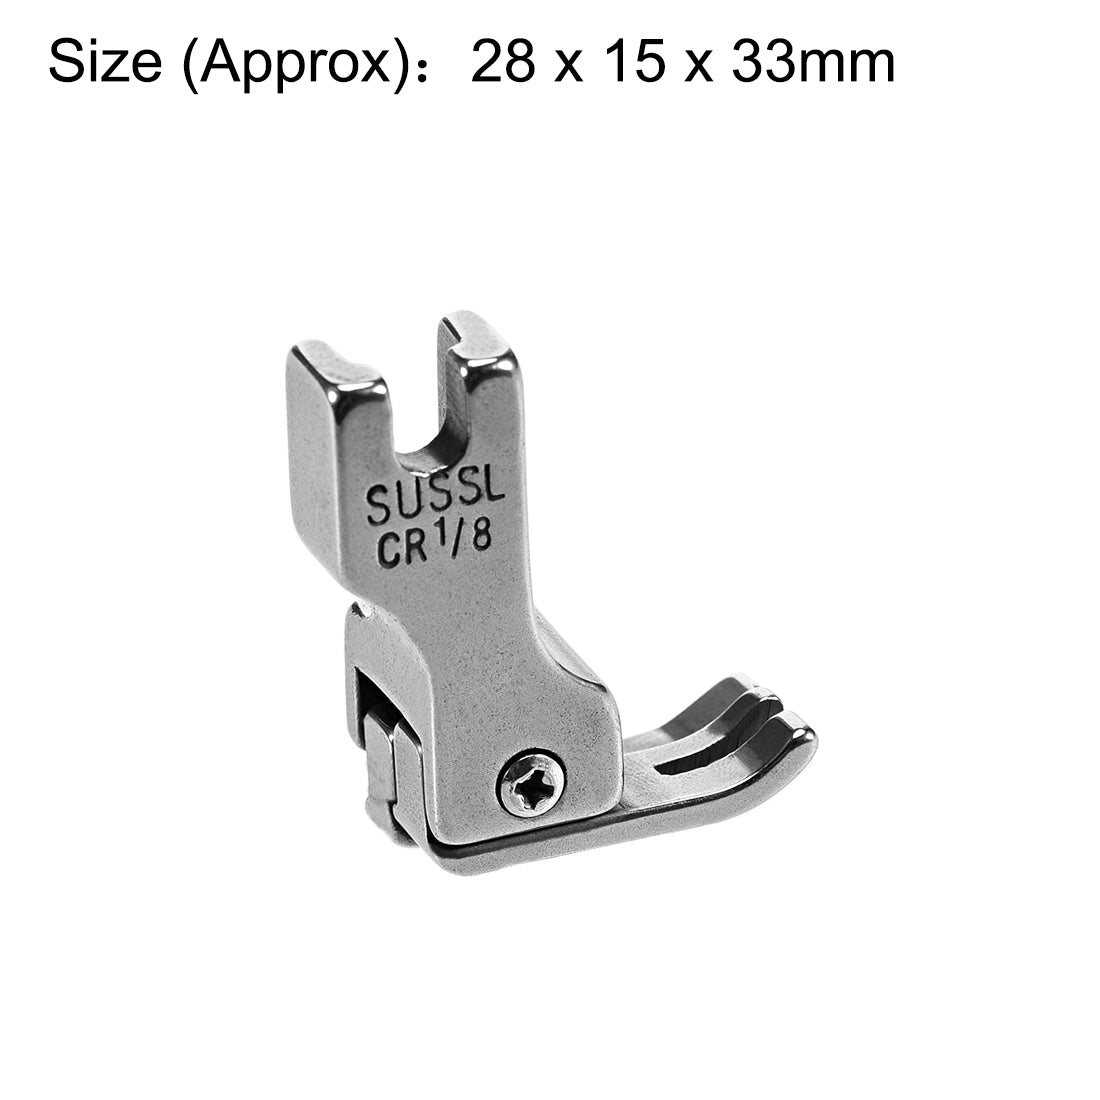 Uxcell Uxcell #CR Right Compensating Presser Foot Fit for Industrial Sewing Machines (1/32")